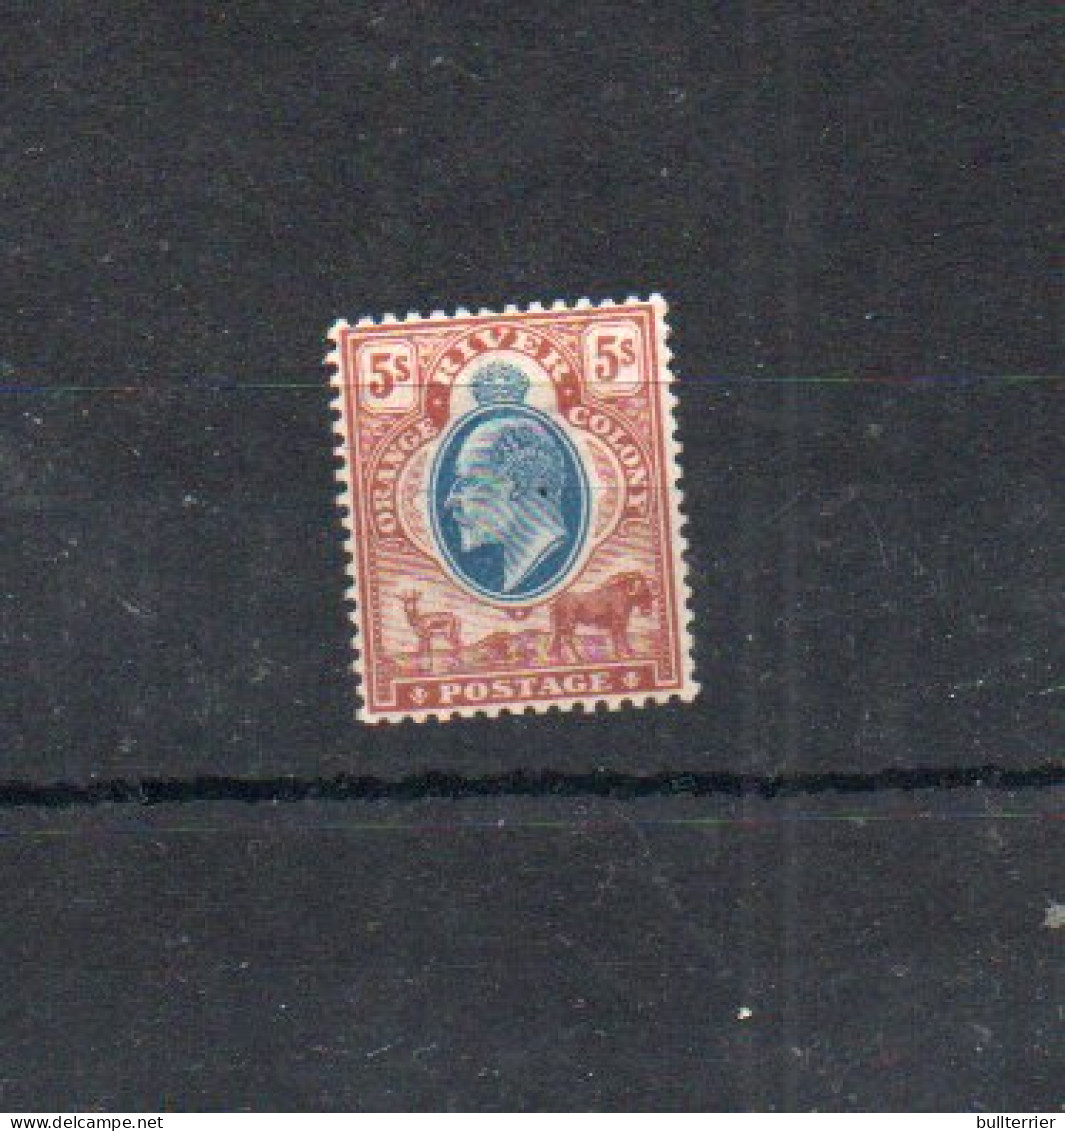 ORANGE FREE STATE - 1903- KING EDWARD VII   5/- MH PREVIOUSLY -VERY FIENE WITH FRESH COLOURS, SG CAT £160 - Oranje-Freistaat (1868-1909)